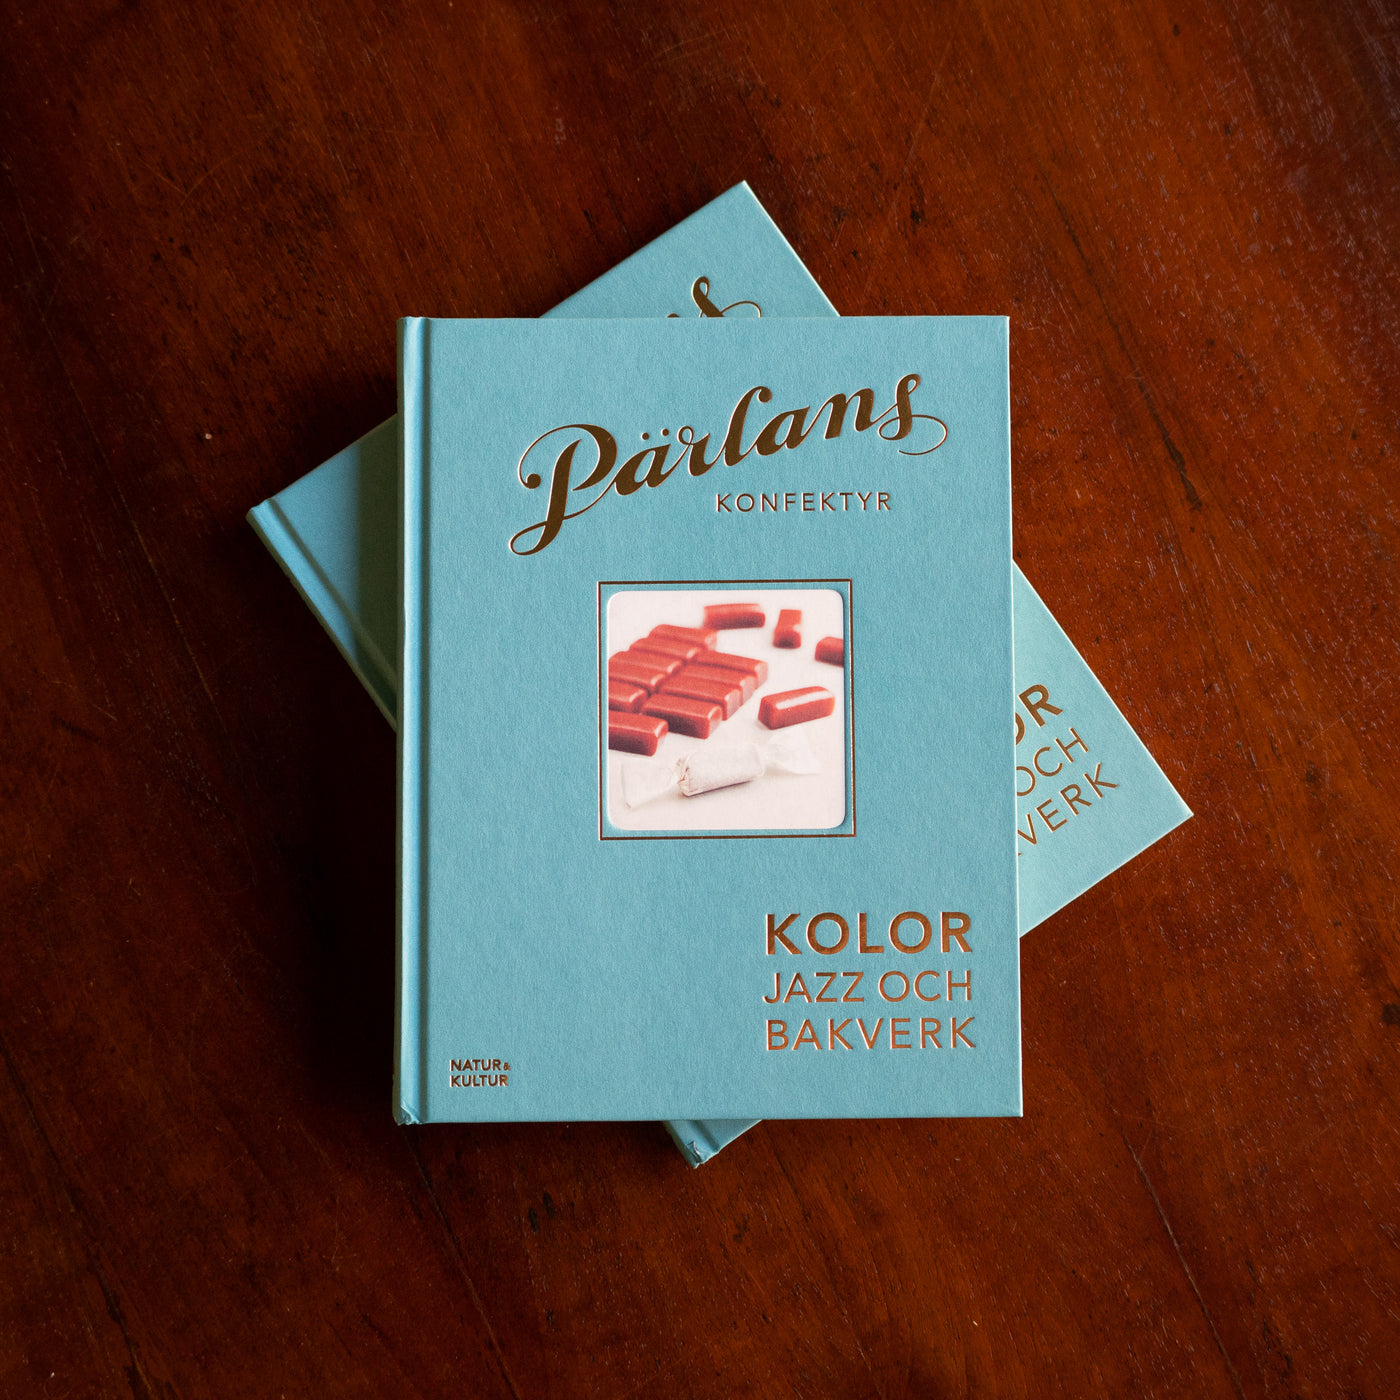 Coffee table book filled with Pärlans recipes, pastries and desserts. Tips and inspiration from the swinging half of the 20th century. 